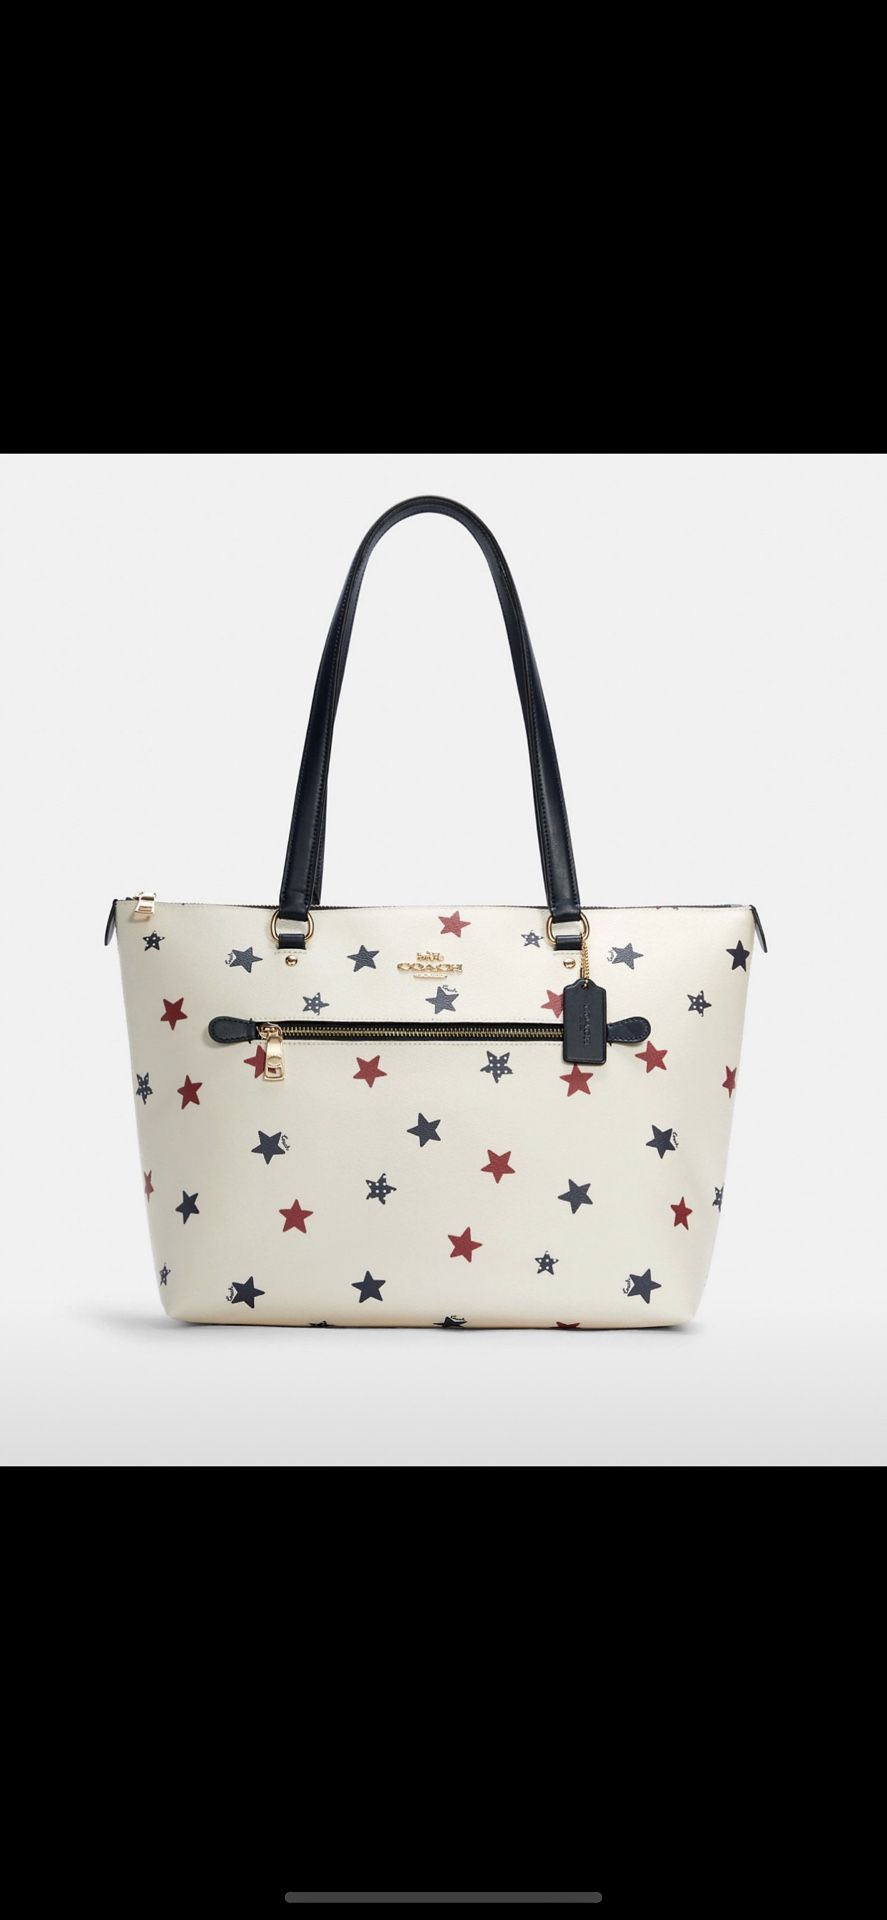 NWT COACH GALLERY TOTE WITH AMERICANA STAR PRINT CHALK CANVAS LEATHER SHOULDER BAG C4299 